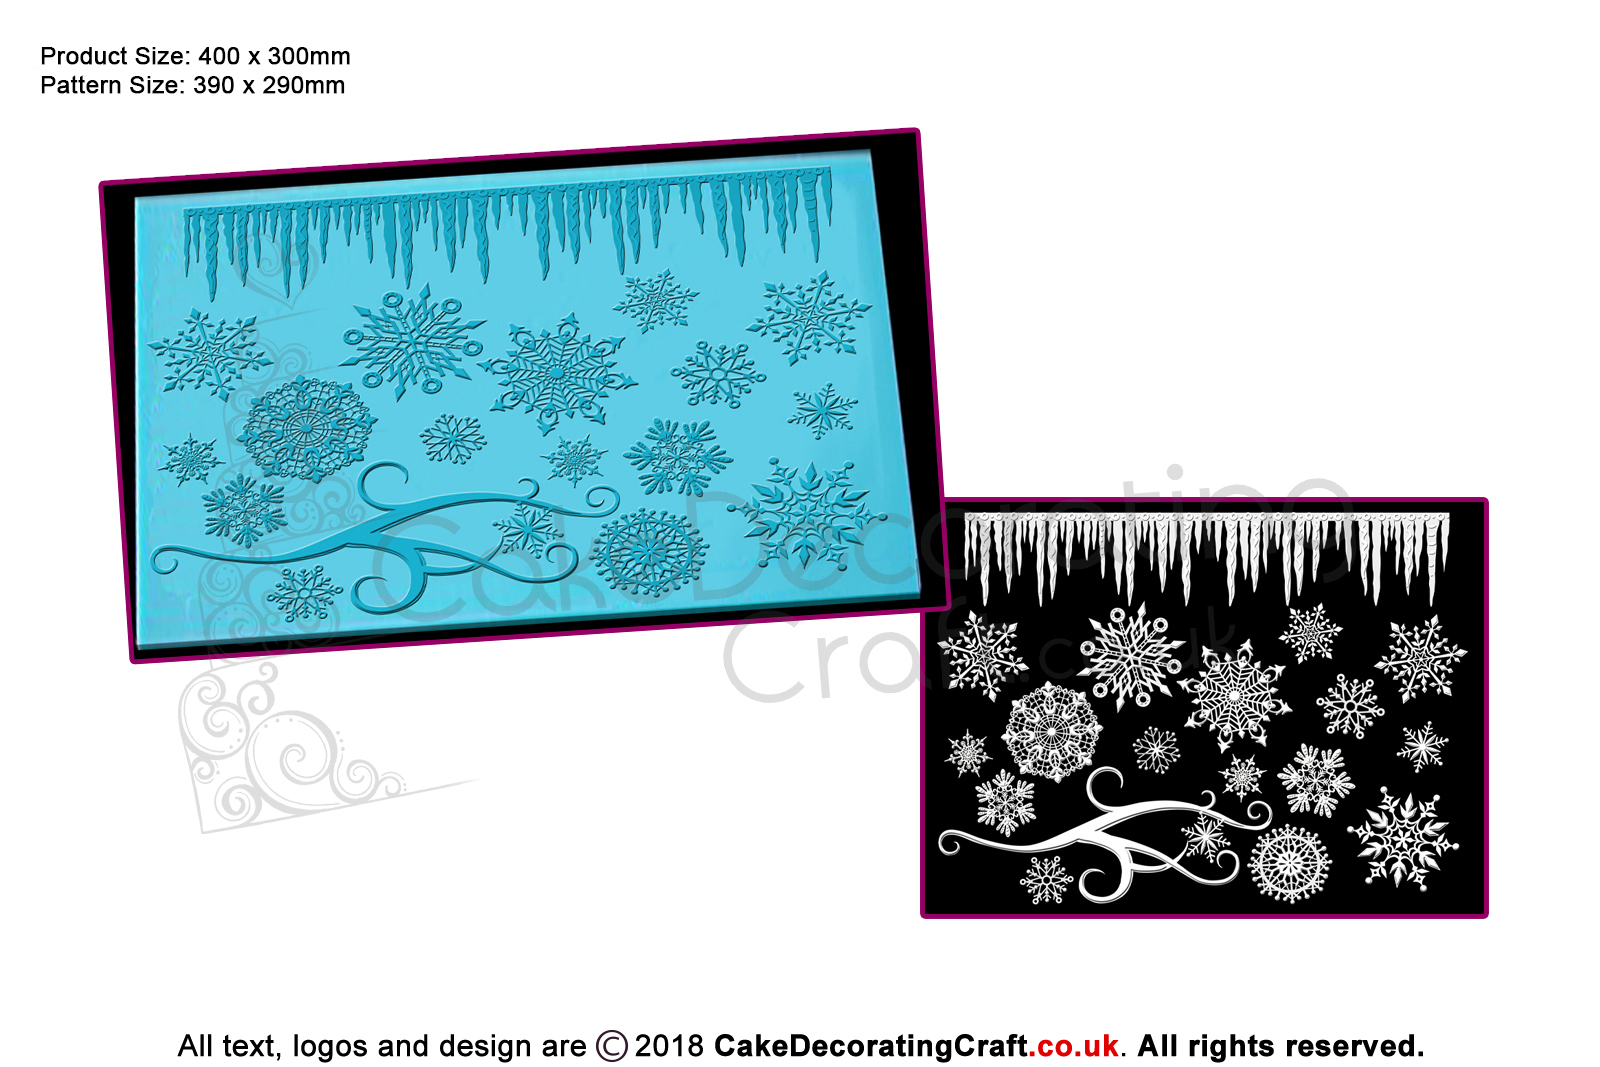 3D Frozen Crystals | Cake Lace Mats for Edible Cake Lace Mixes and Premixes | Cake Decorating Craft Tool